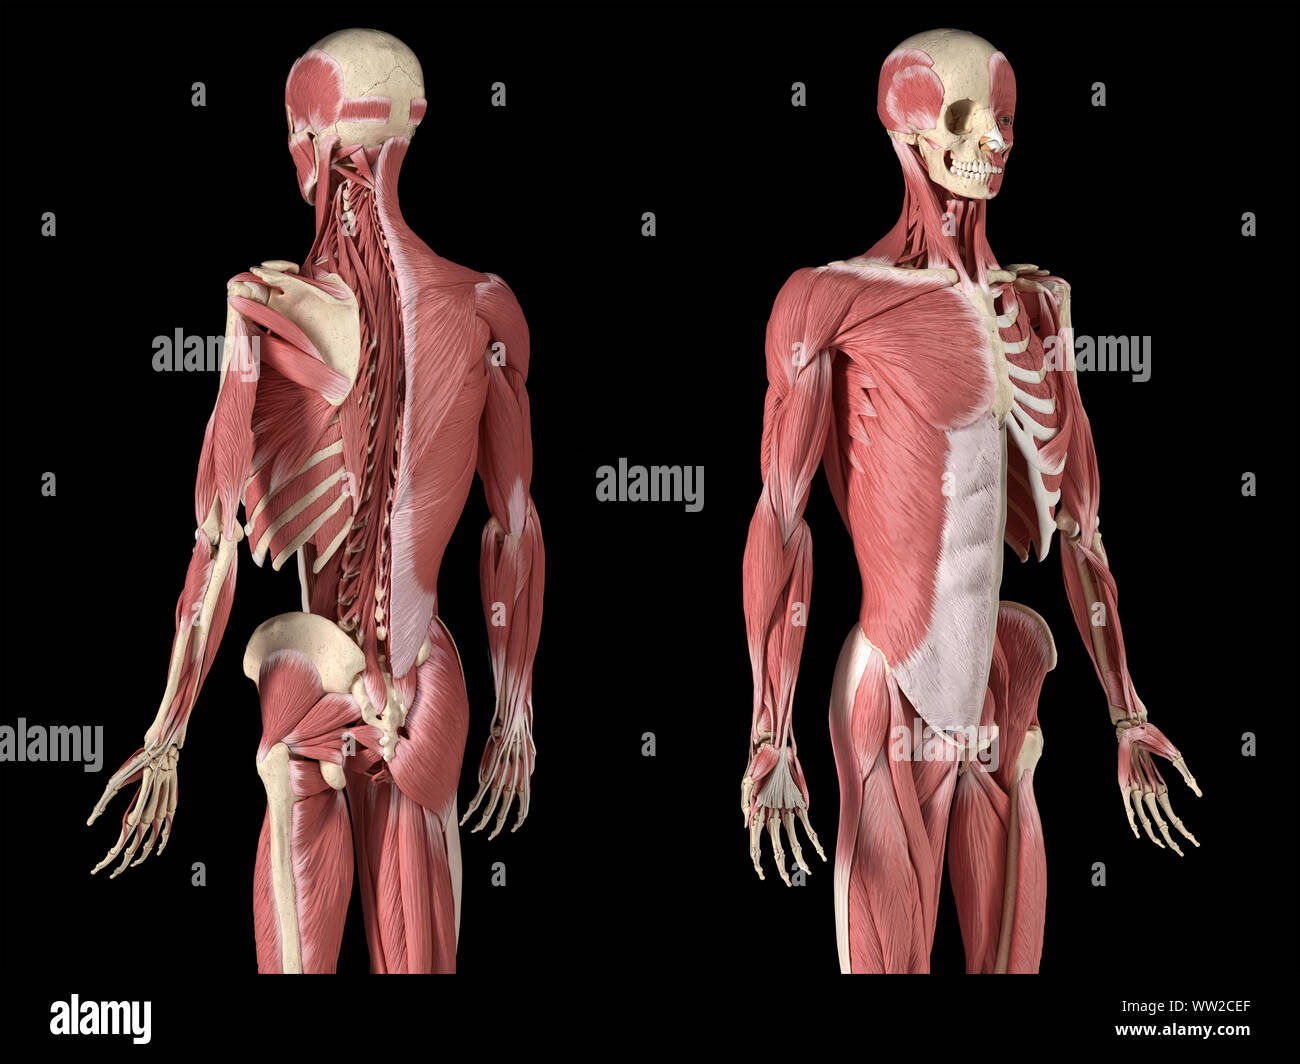 Human male anatomy, 3/4 figure muscular and skeletal systems, with internal muscle layers. Back and front perspective views. on black background. 3d a Stock Photo